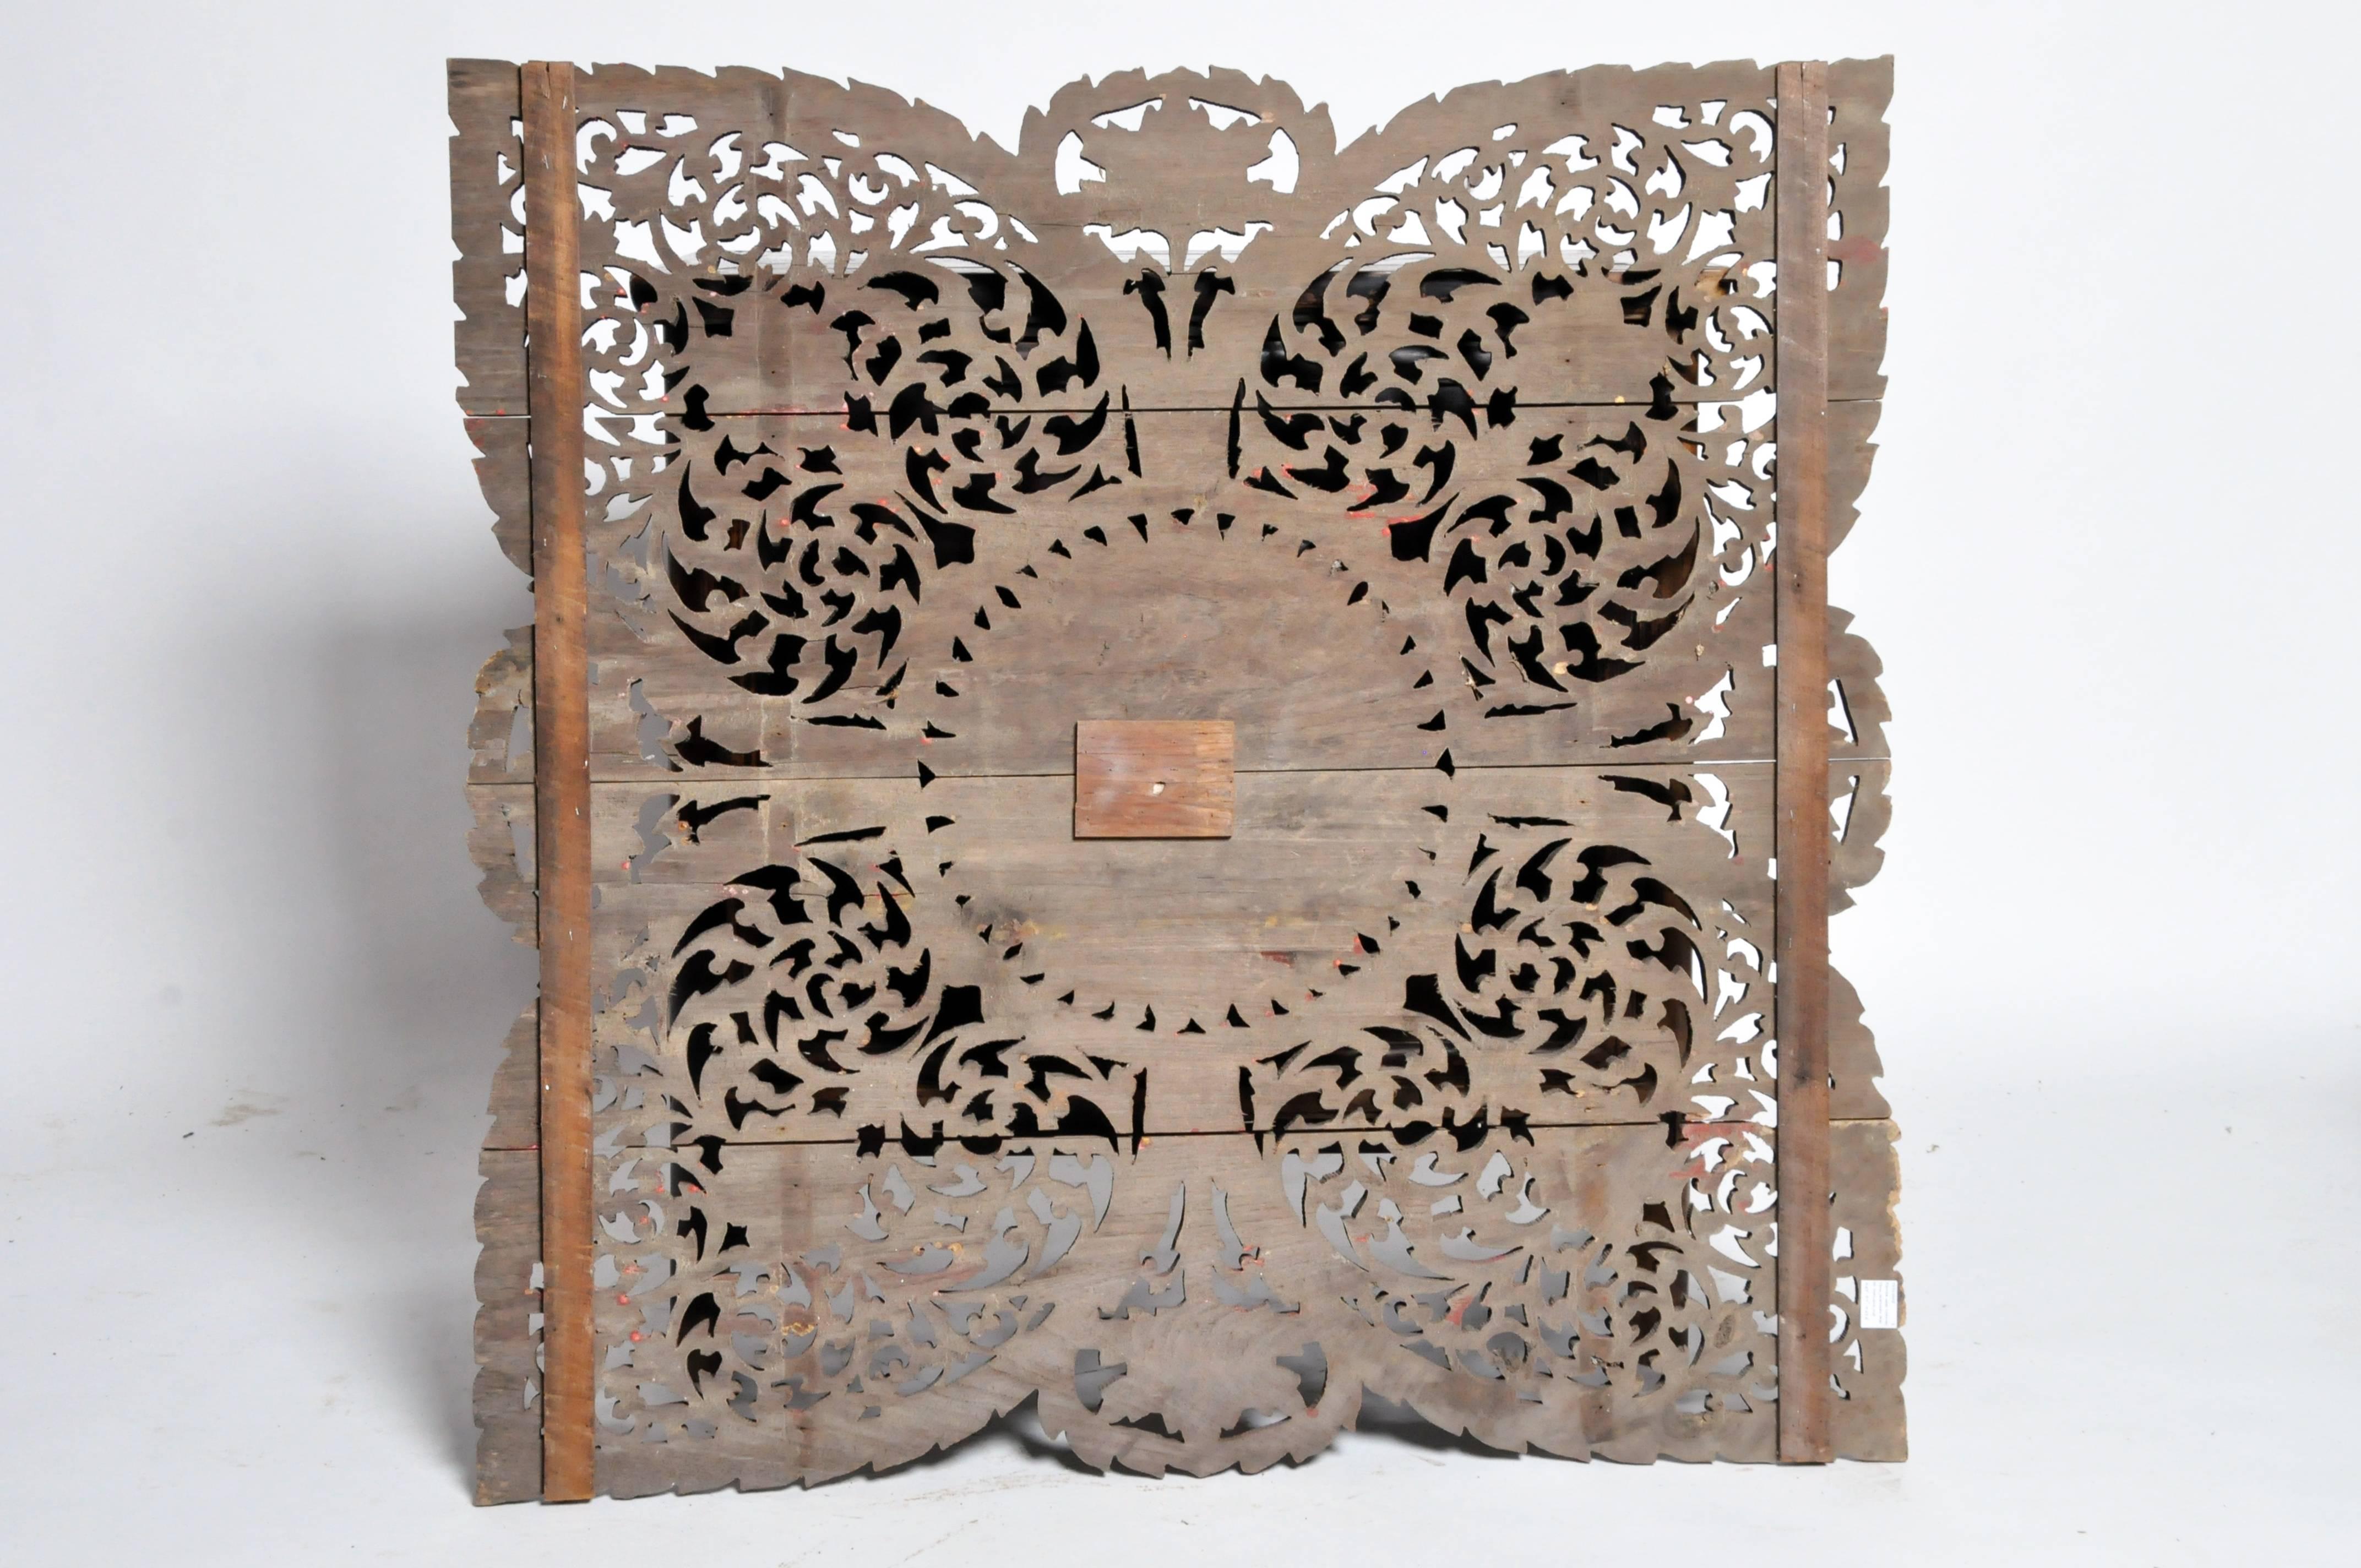 This intricate flower wood carving is made from reclaimed teak wood and comes from Northern Thailand.